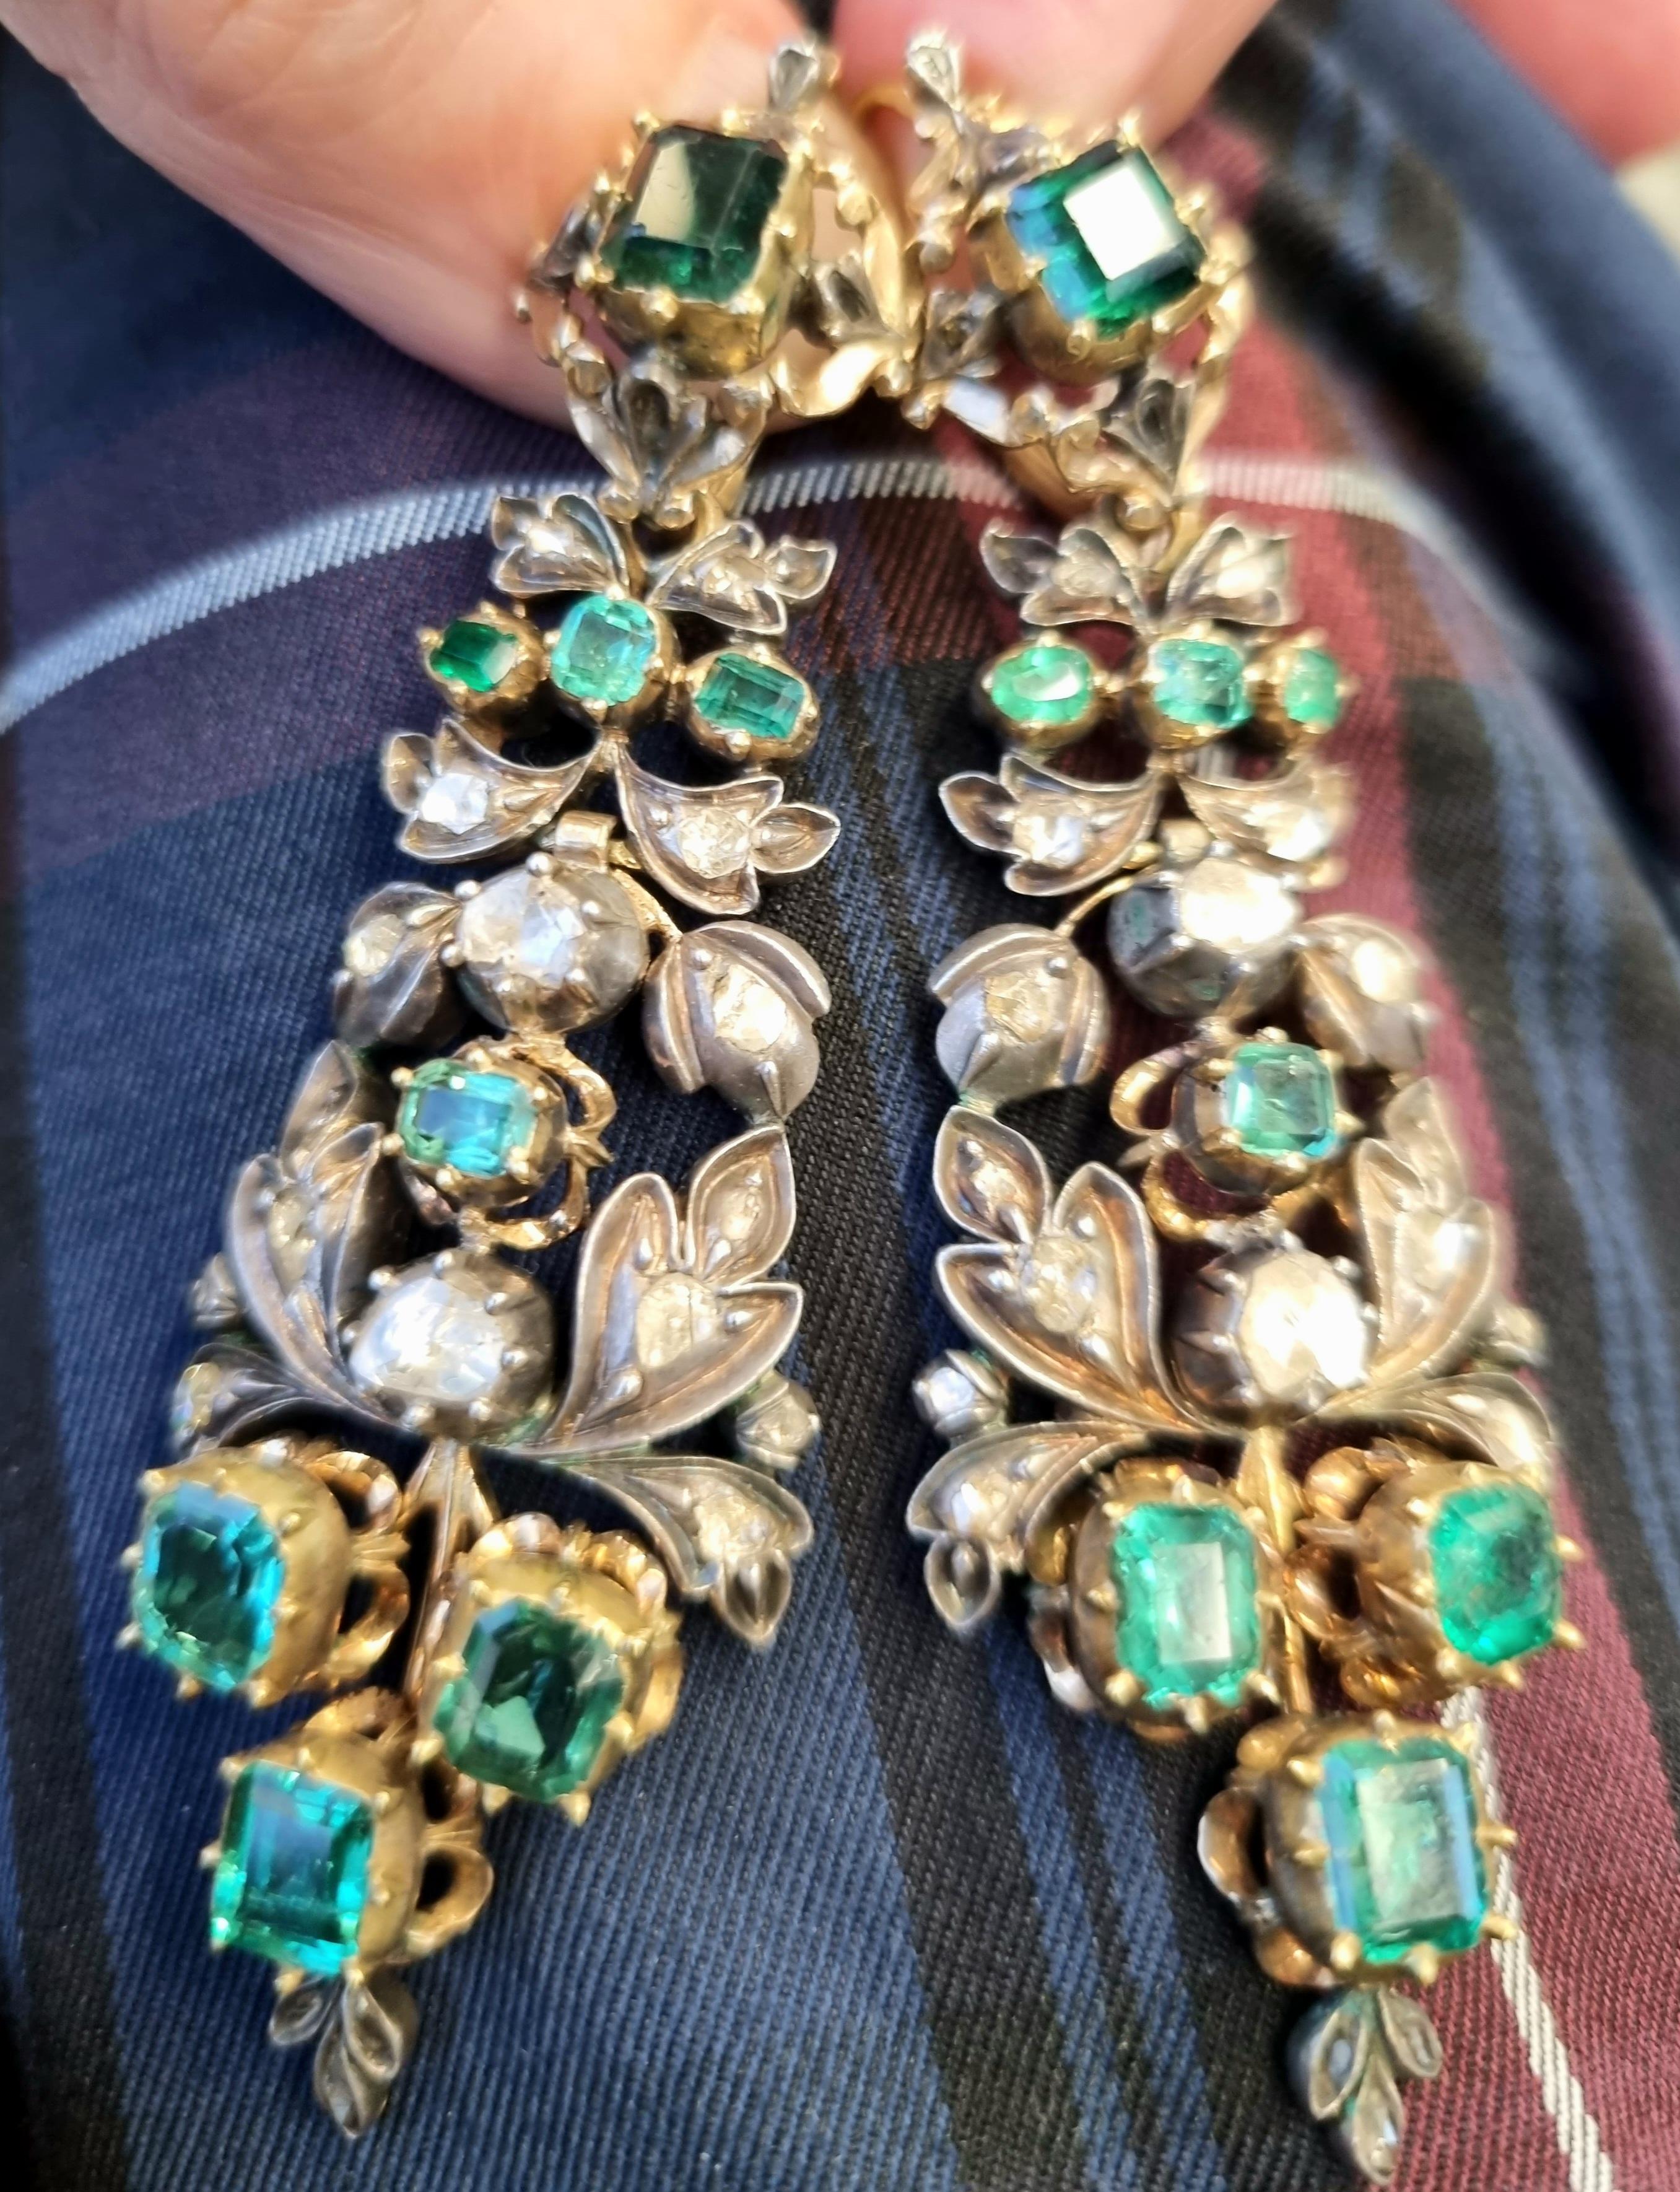 Dazzling pair of museum quality chandelier earrings (collector's item), with electric foiled Emeralds. Inlaid with rose-cut and table-cut diamonds.
Superbly preserved, dating from the late 18th century (1780). A set of sparkling flat rose-cut